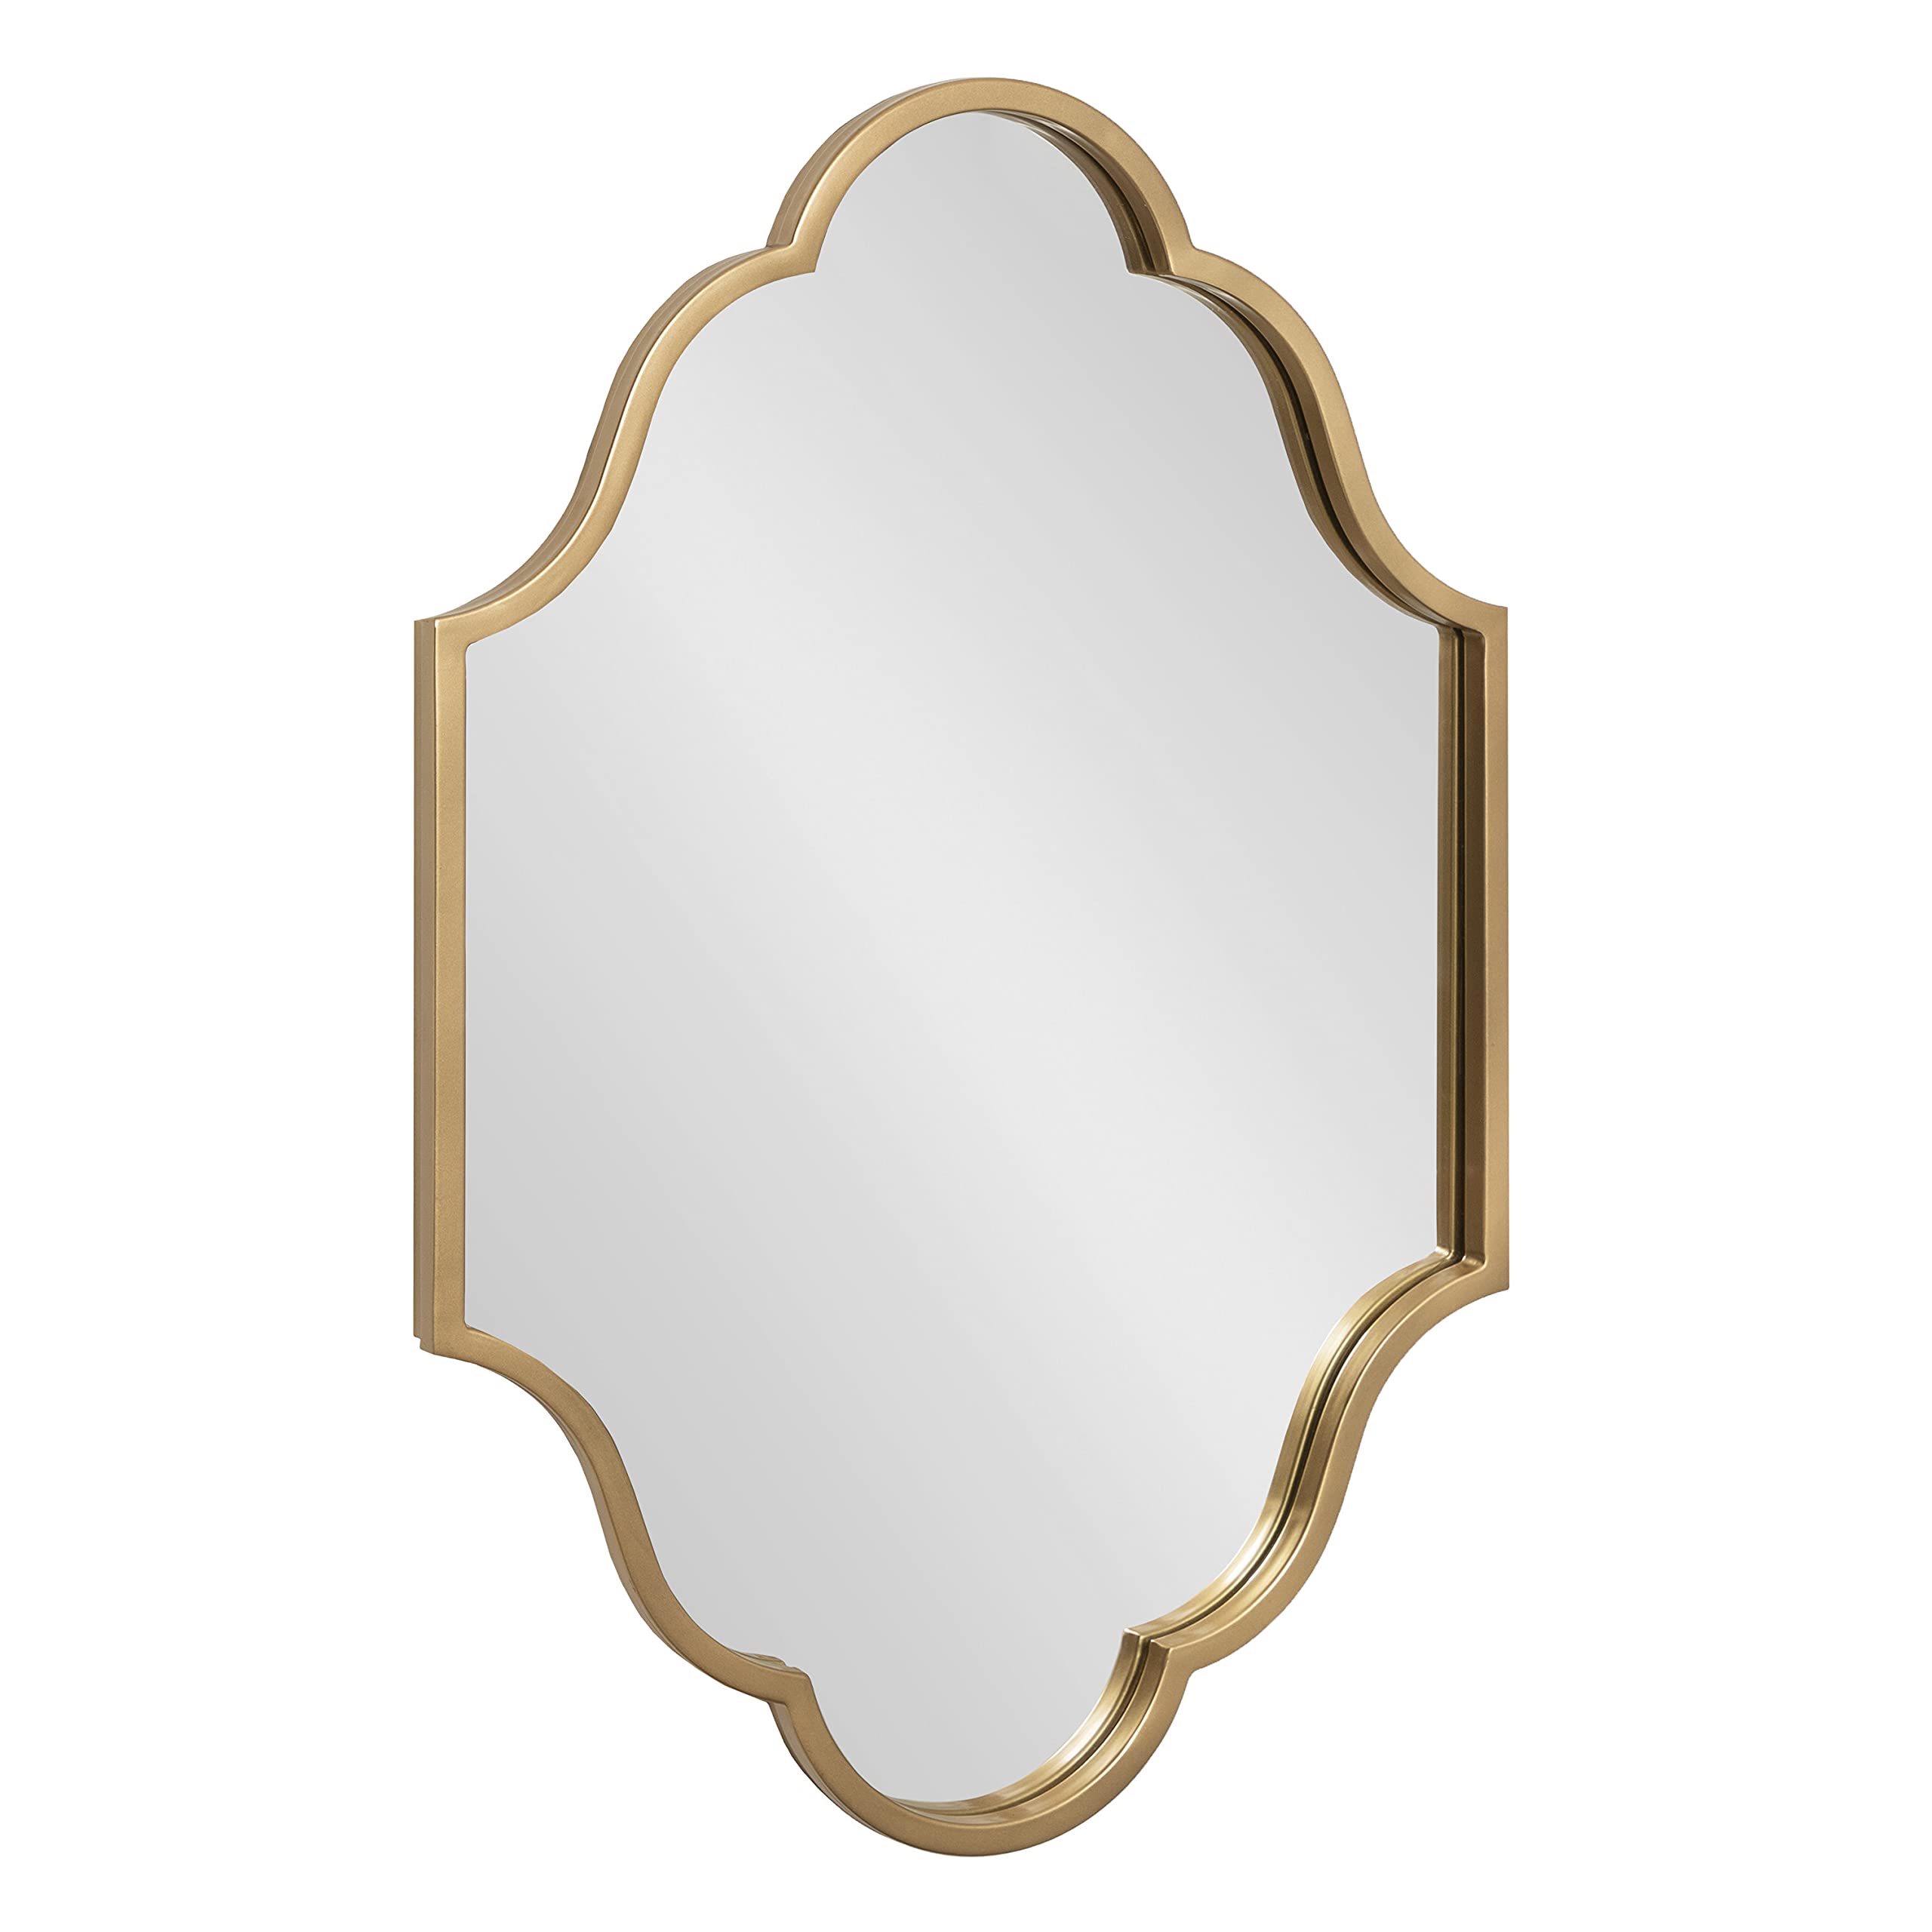 Kate and Laurel Rowla Framed Wall Mirror, 20x30, Gold